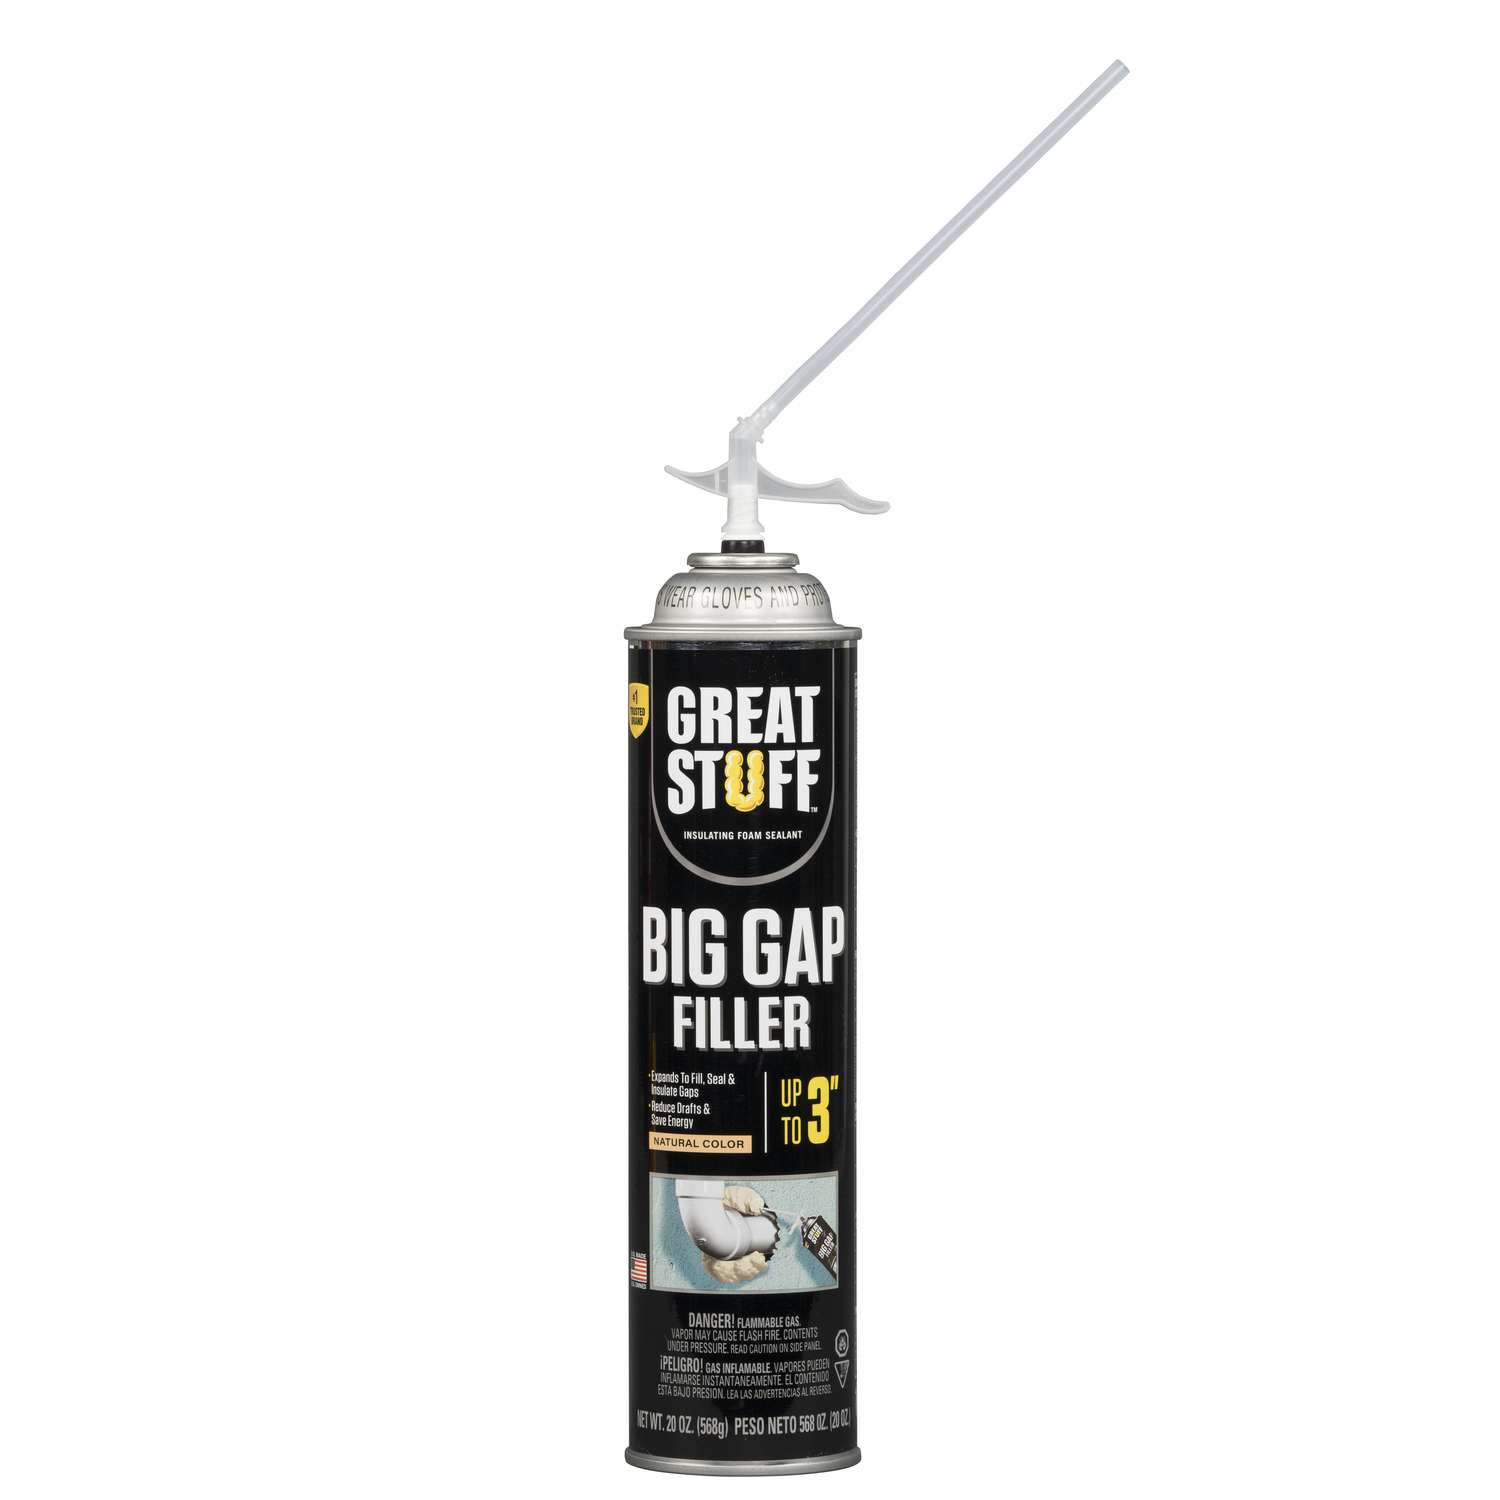 Have a question about GREAT STUFF 12 oz. Pond and Stone Insulating Foam  Sealant? - Pg 1 - The Home Depot